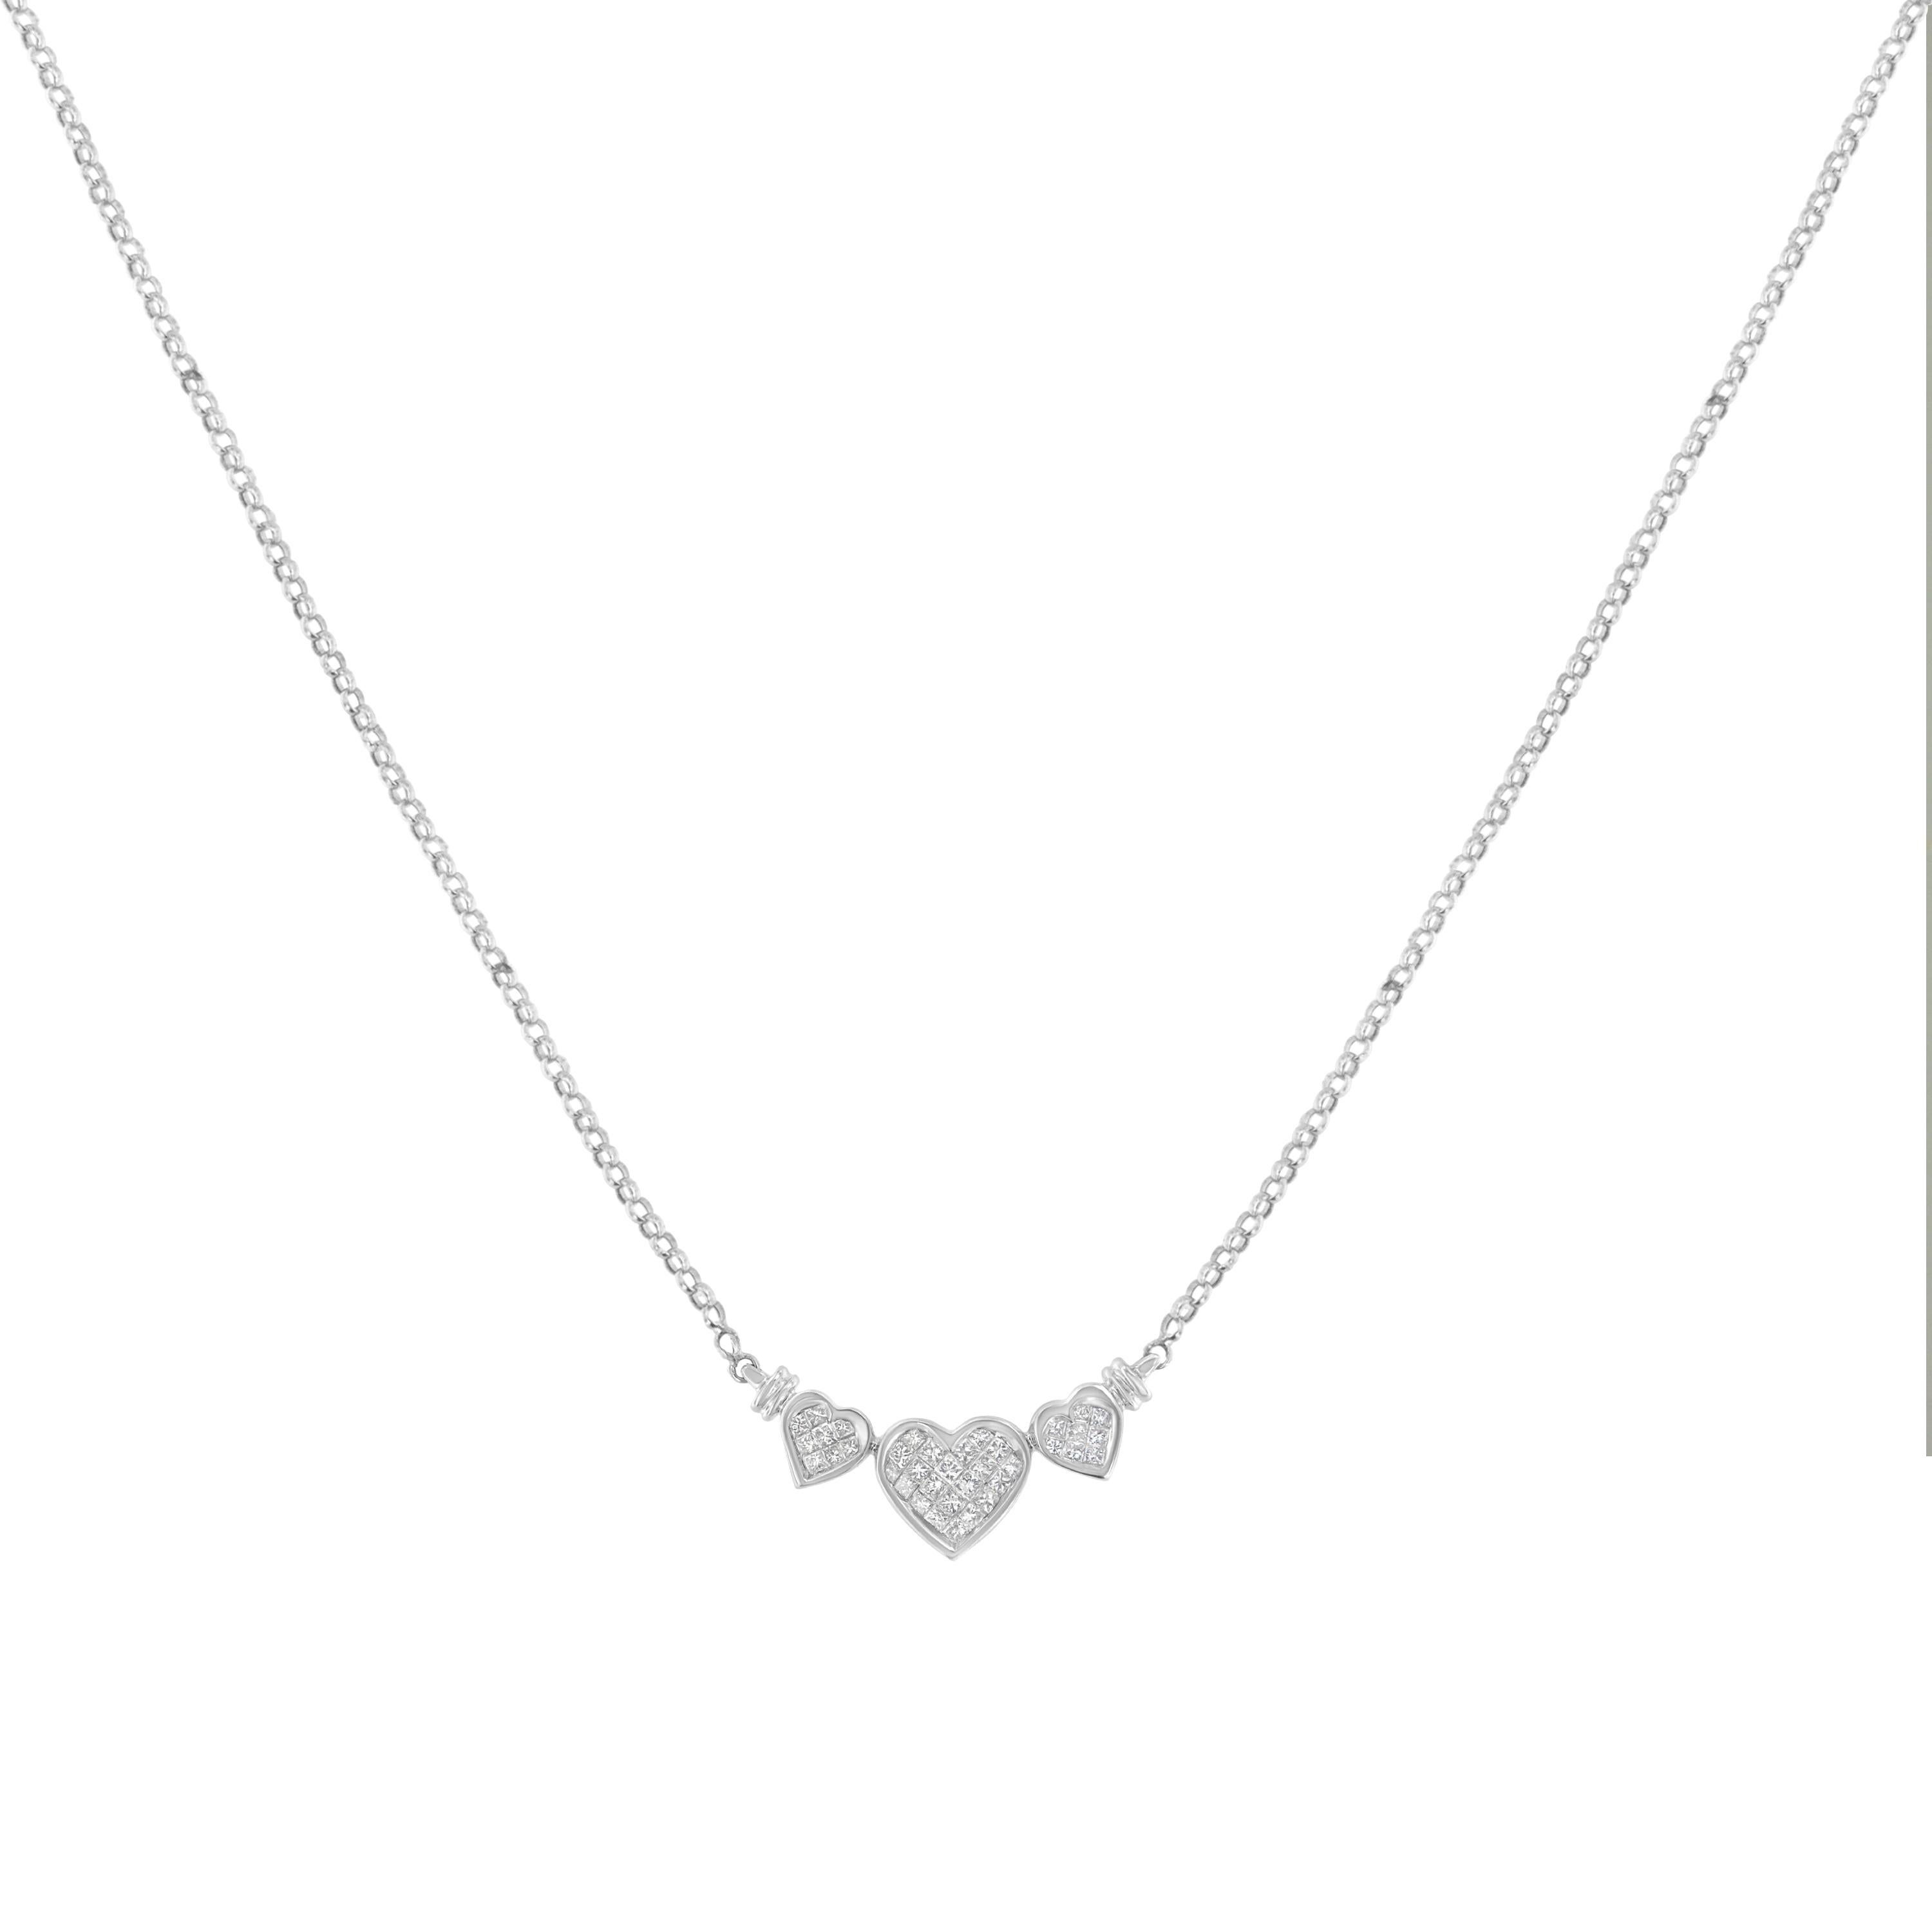 Experience the elegance and romance with this stunning statement necklace, featuring a captivating design of one large heart nestled between two smaller ones, all intricately set with multiple princess cut diamonds in an invisible setting. This